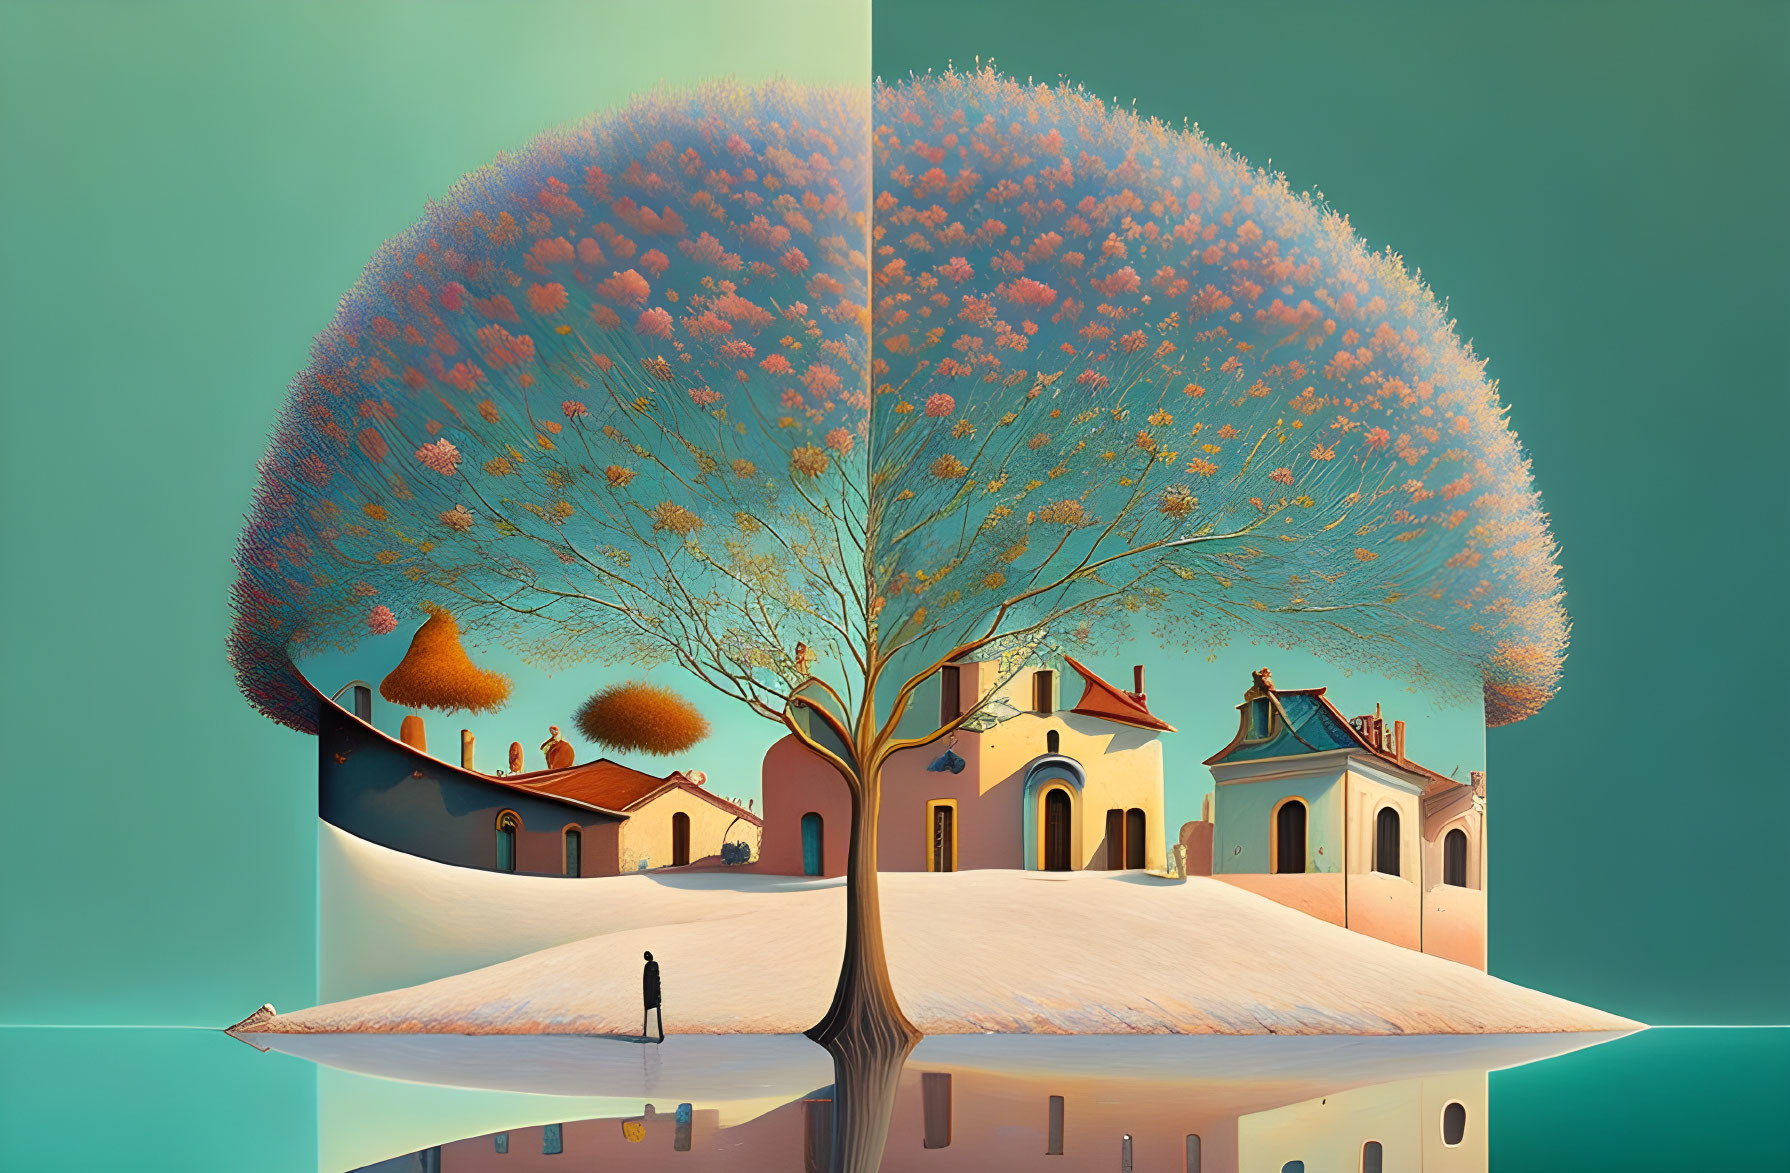 Surreal illustration: person under massive tree with blooming branches, mirrored whimsical buildings.